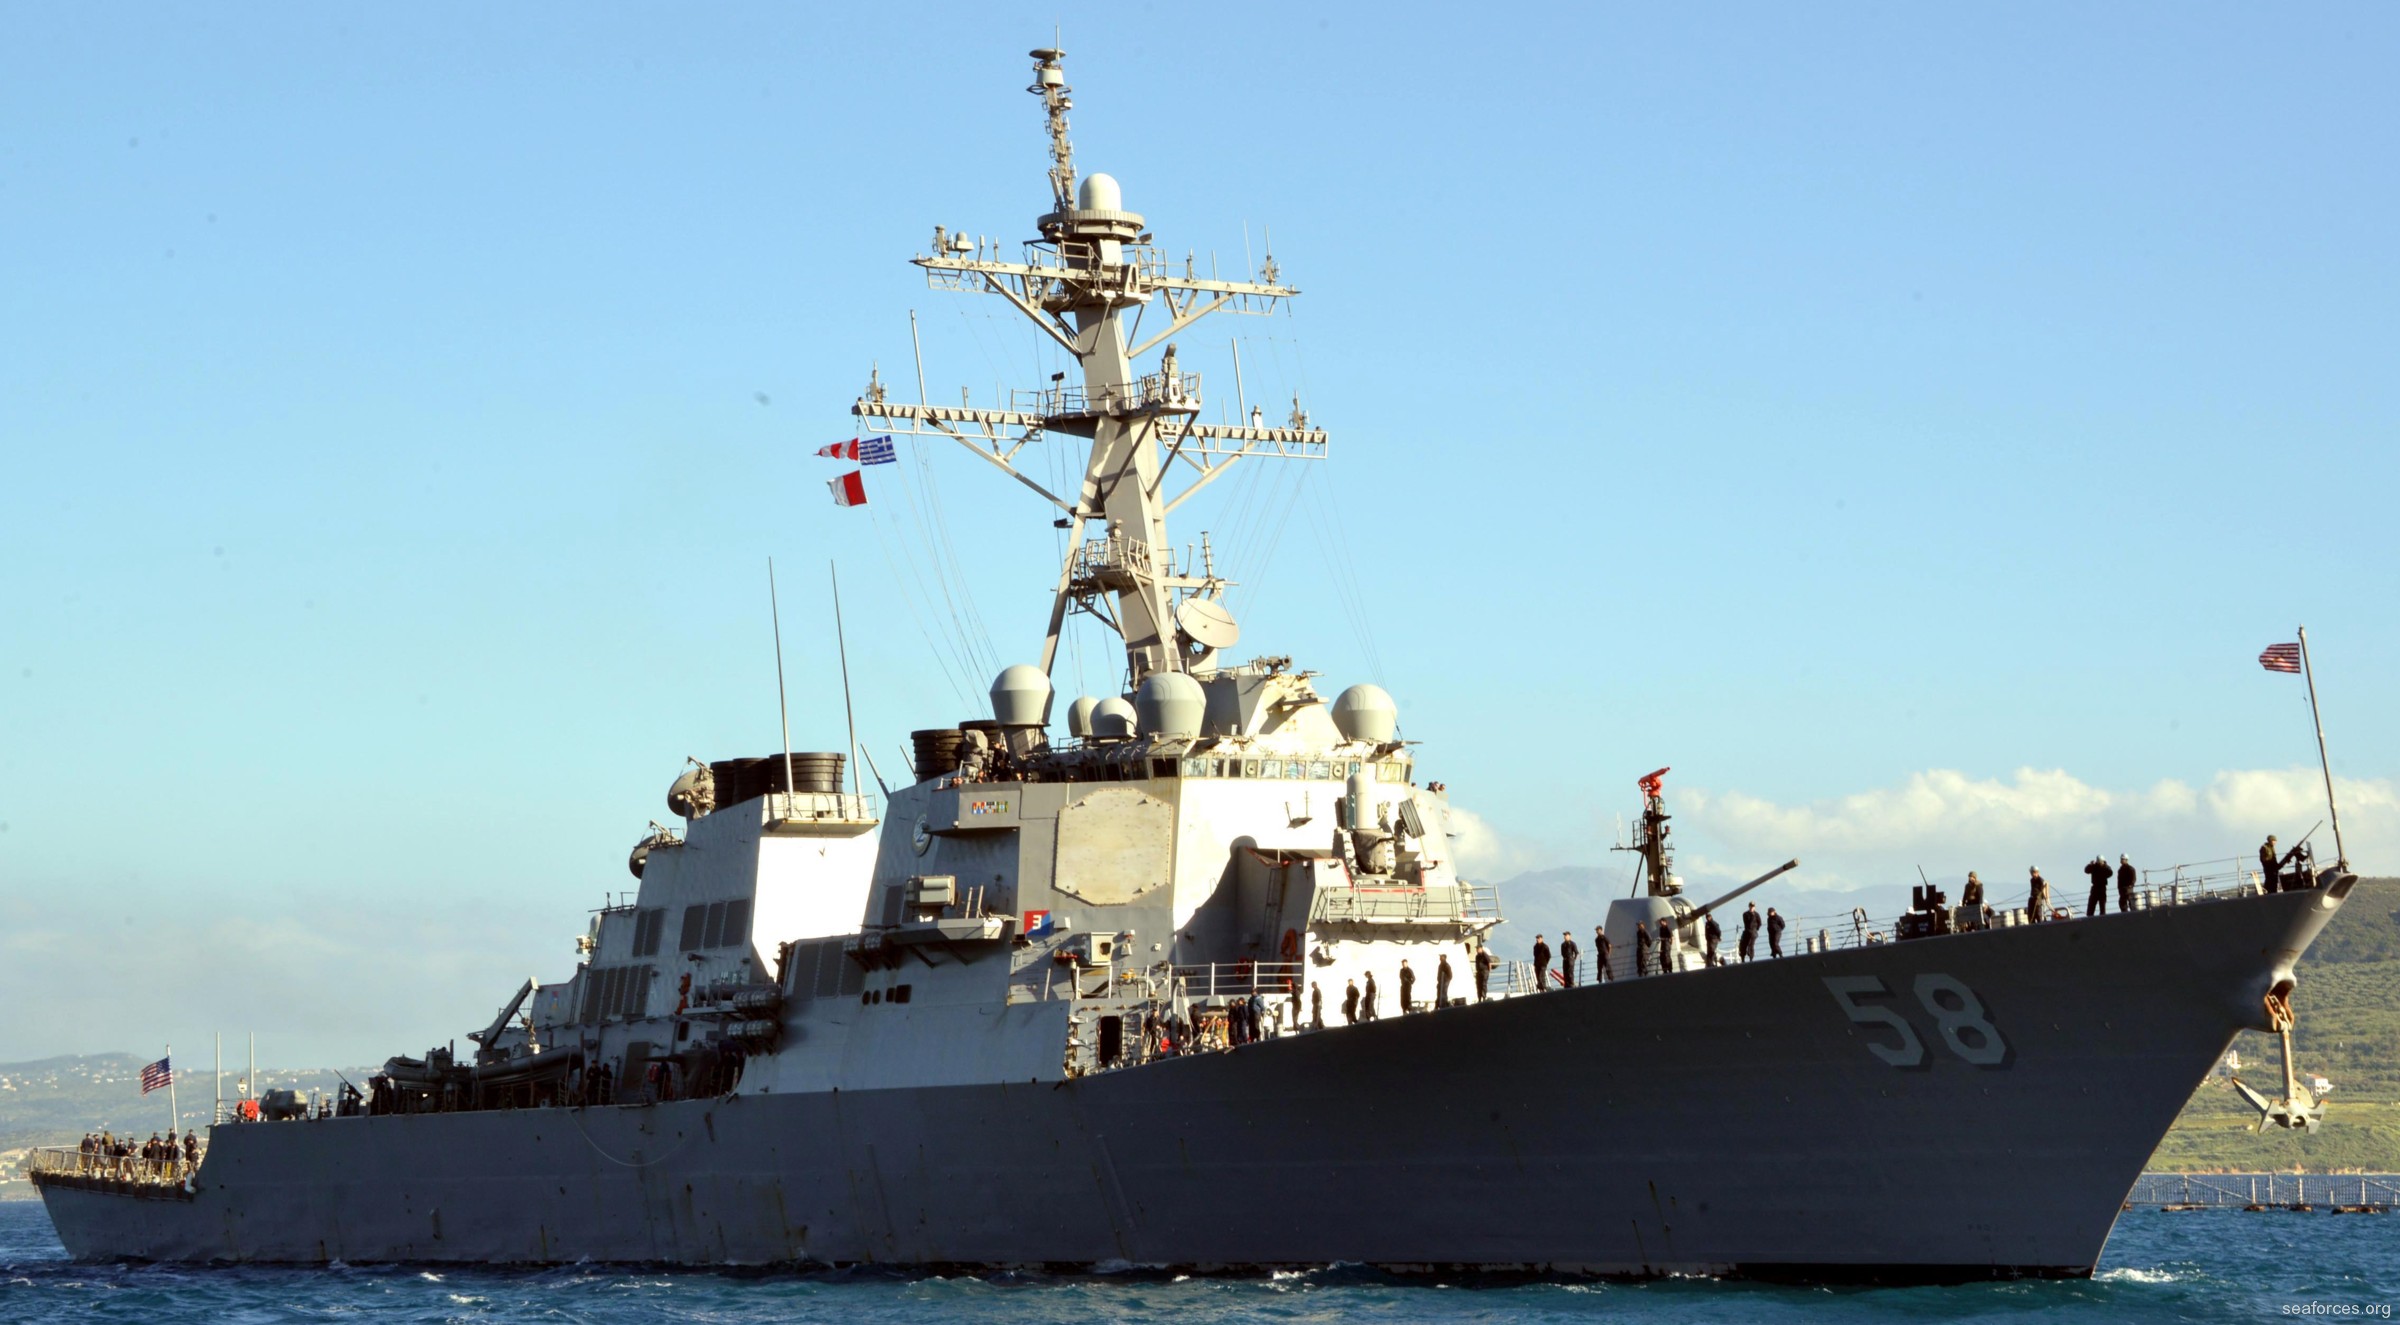 ddg-58 uss laboon guided missile destroyer us navy 22 arleigh burke class